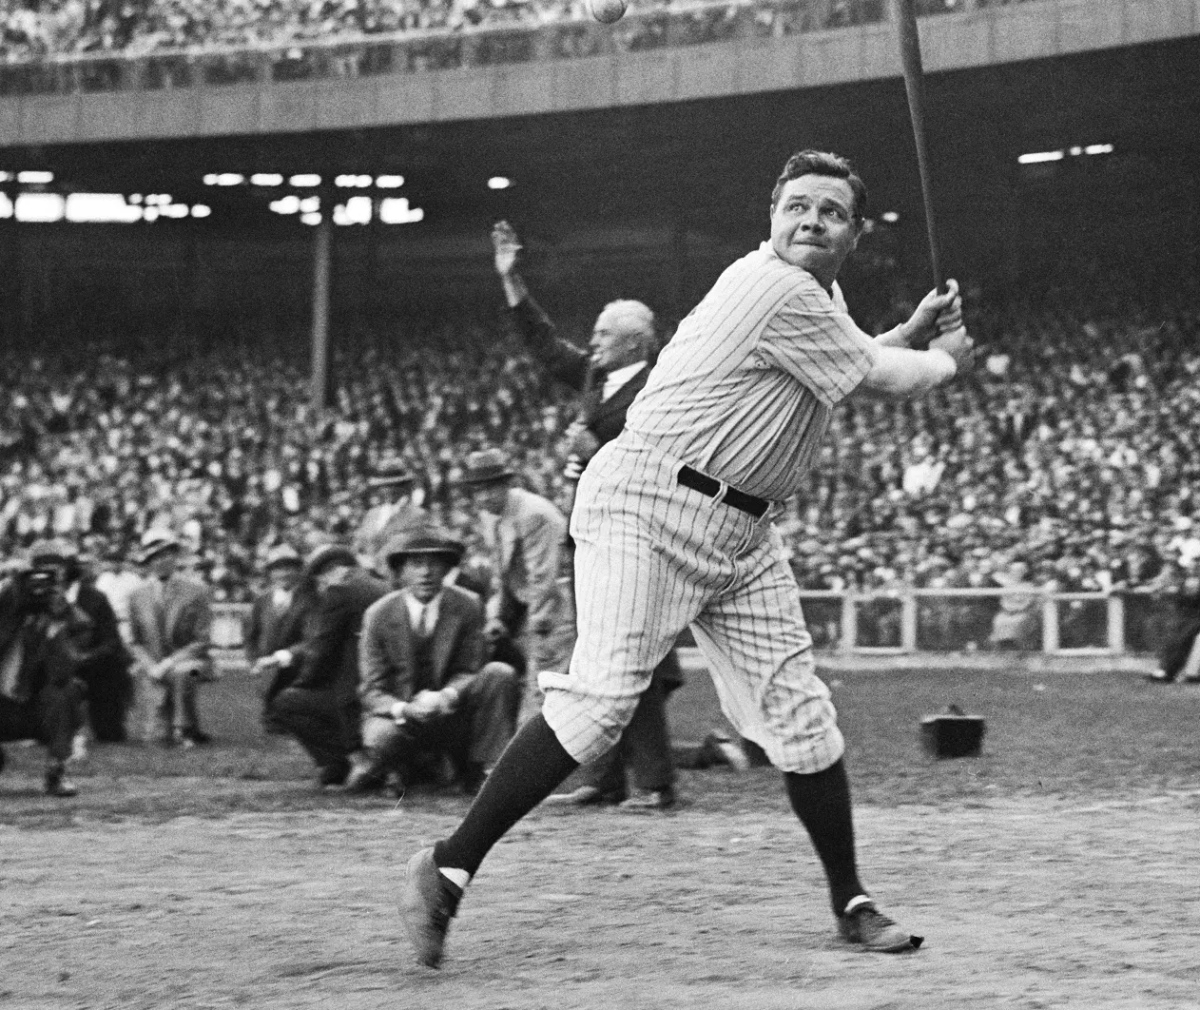 Babe Ruth in Action at Yankee Stadium.